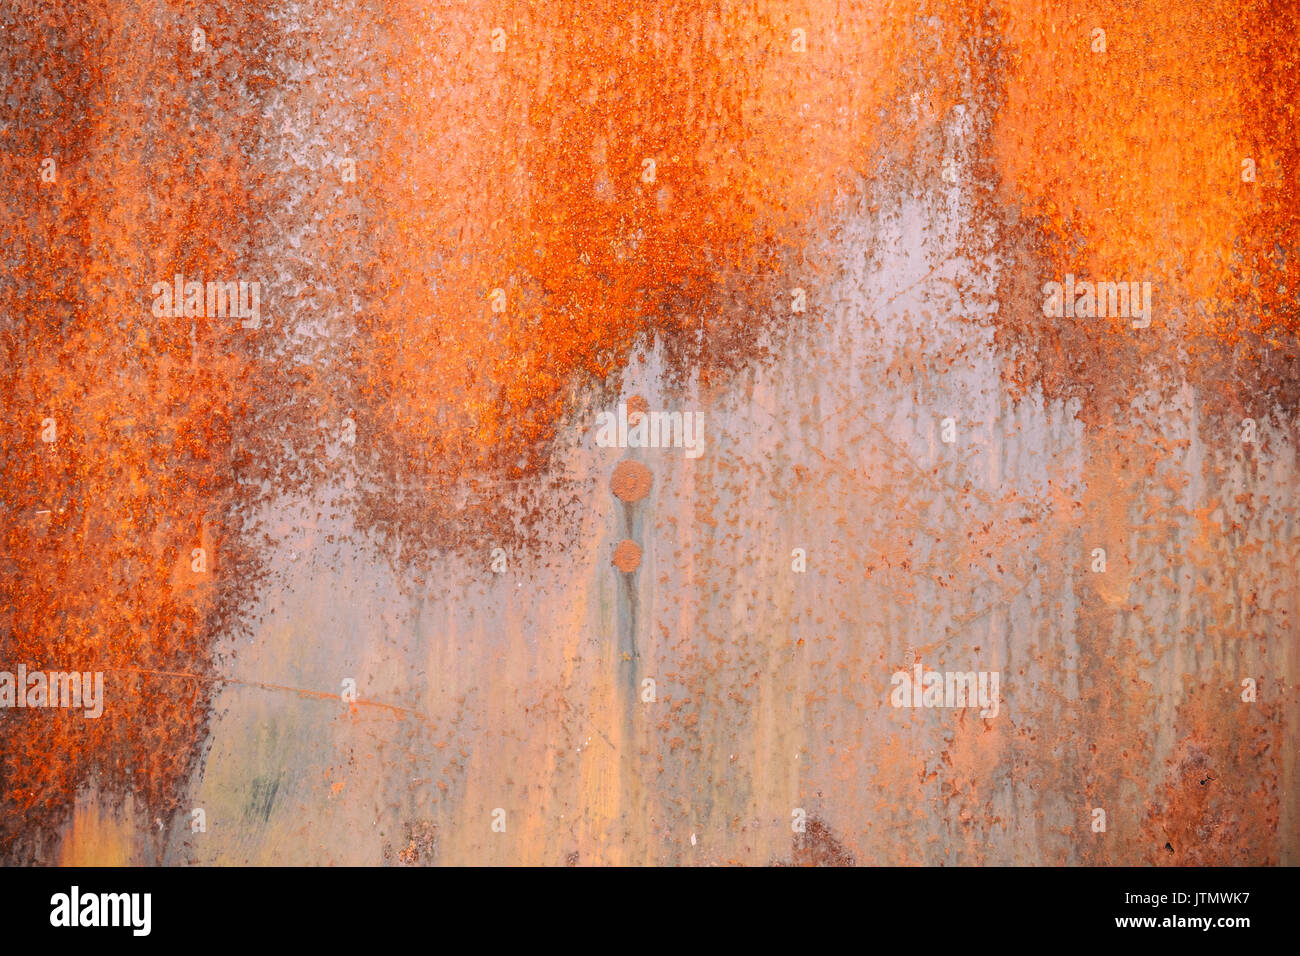 Abstract corroded rusty metal background, rusty metal texture Stock Photo